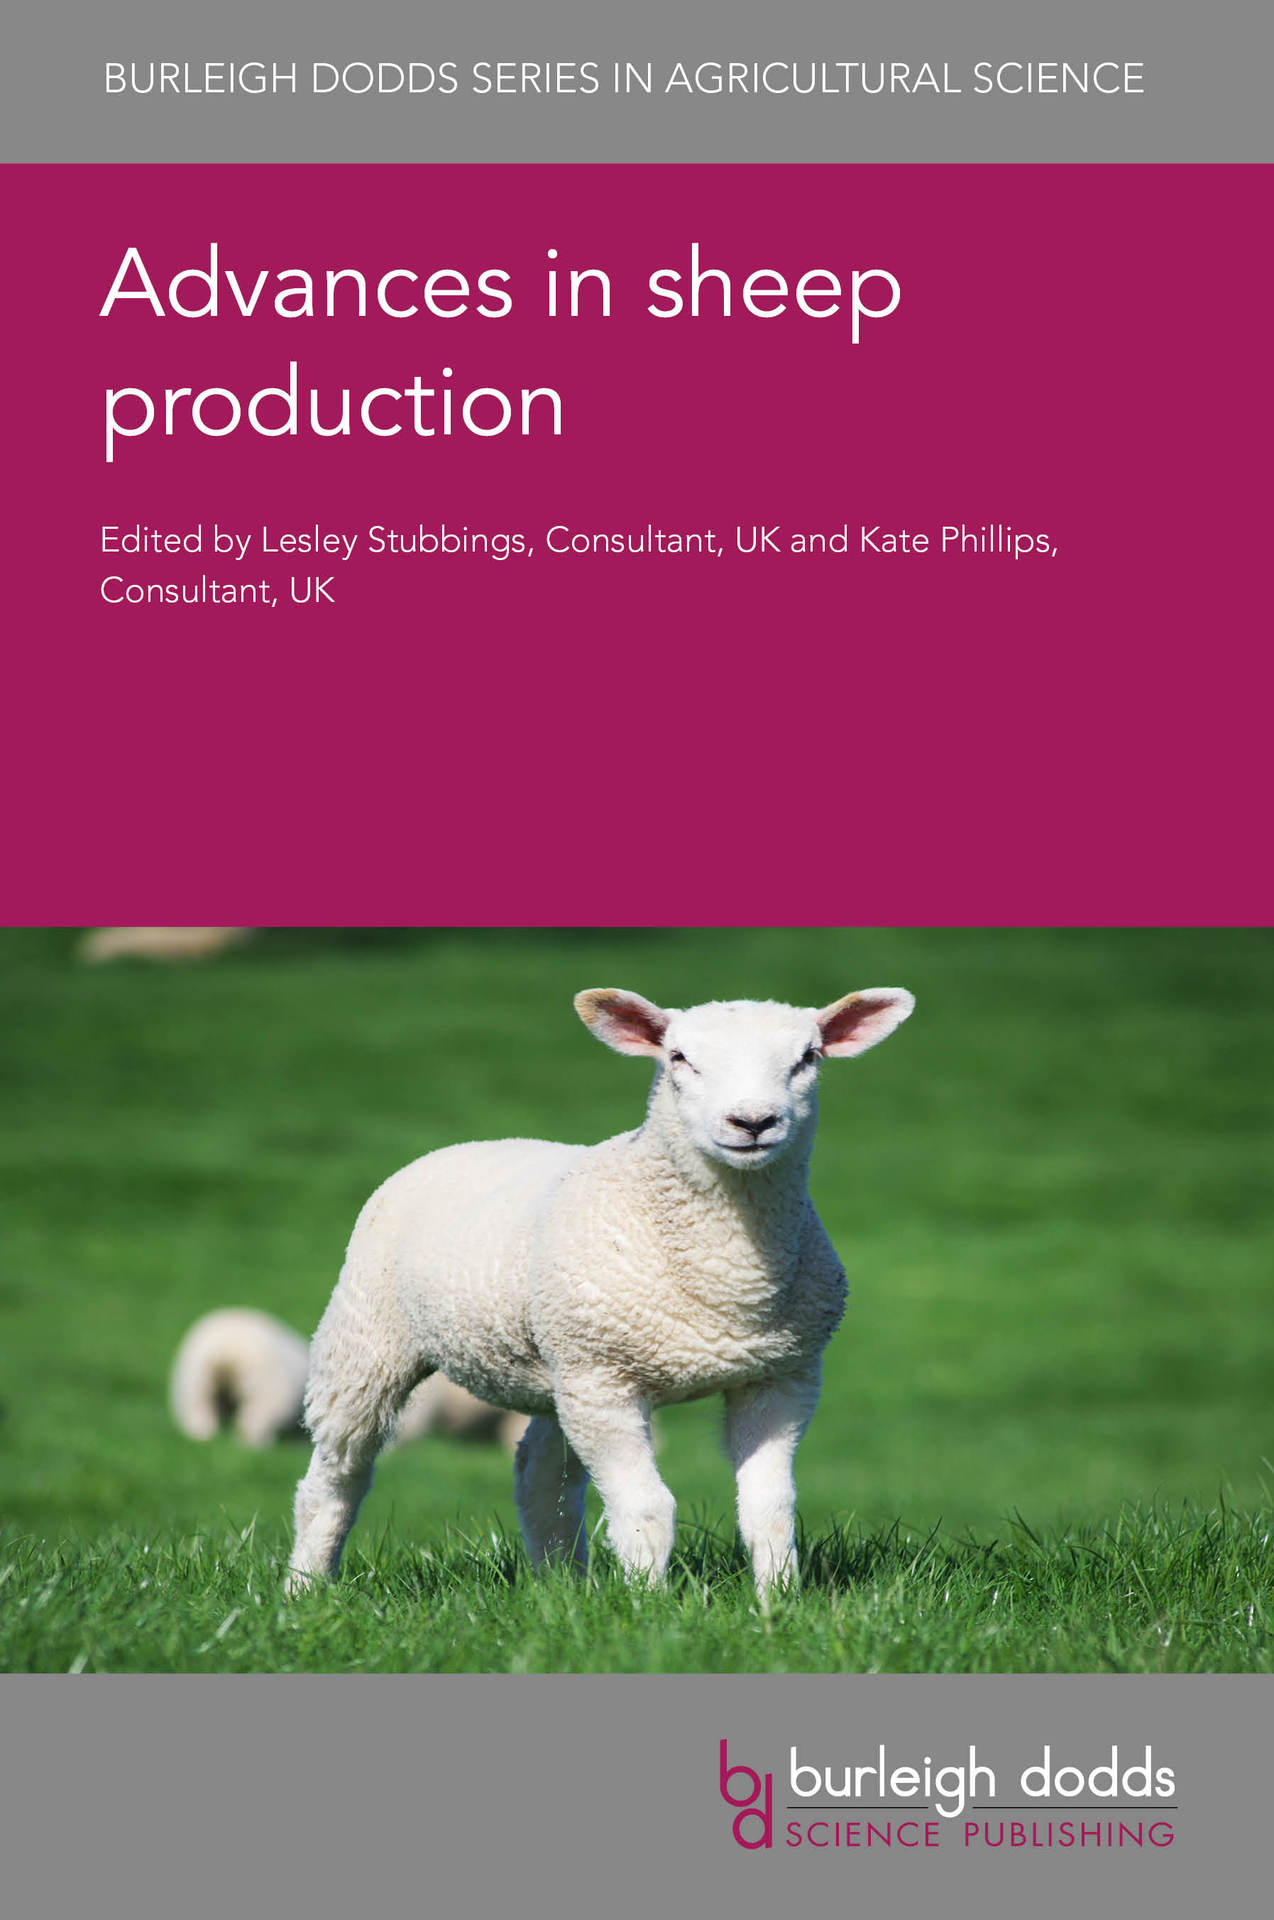 Advances in sheep production